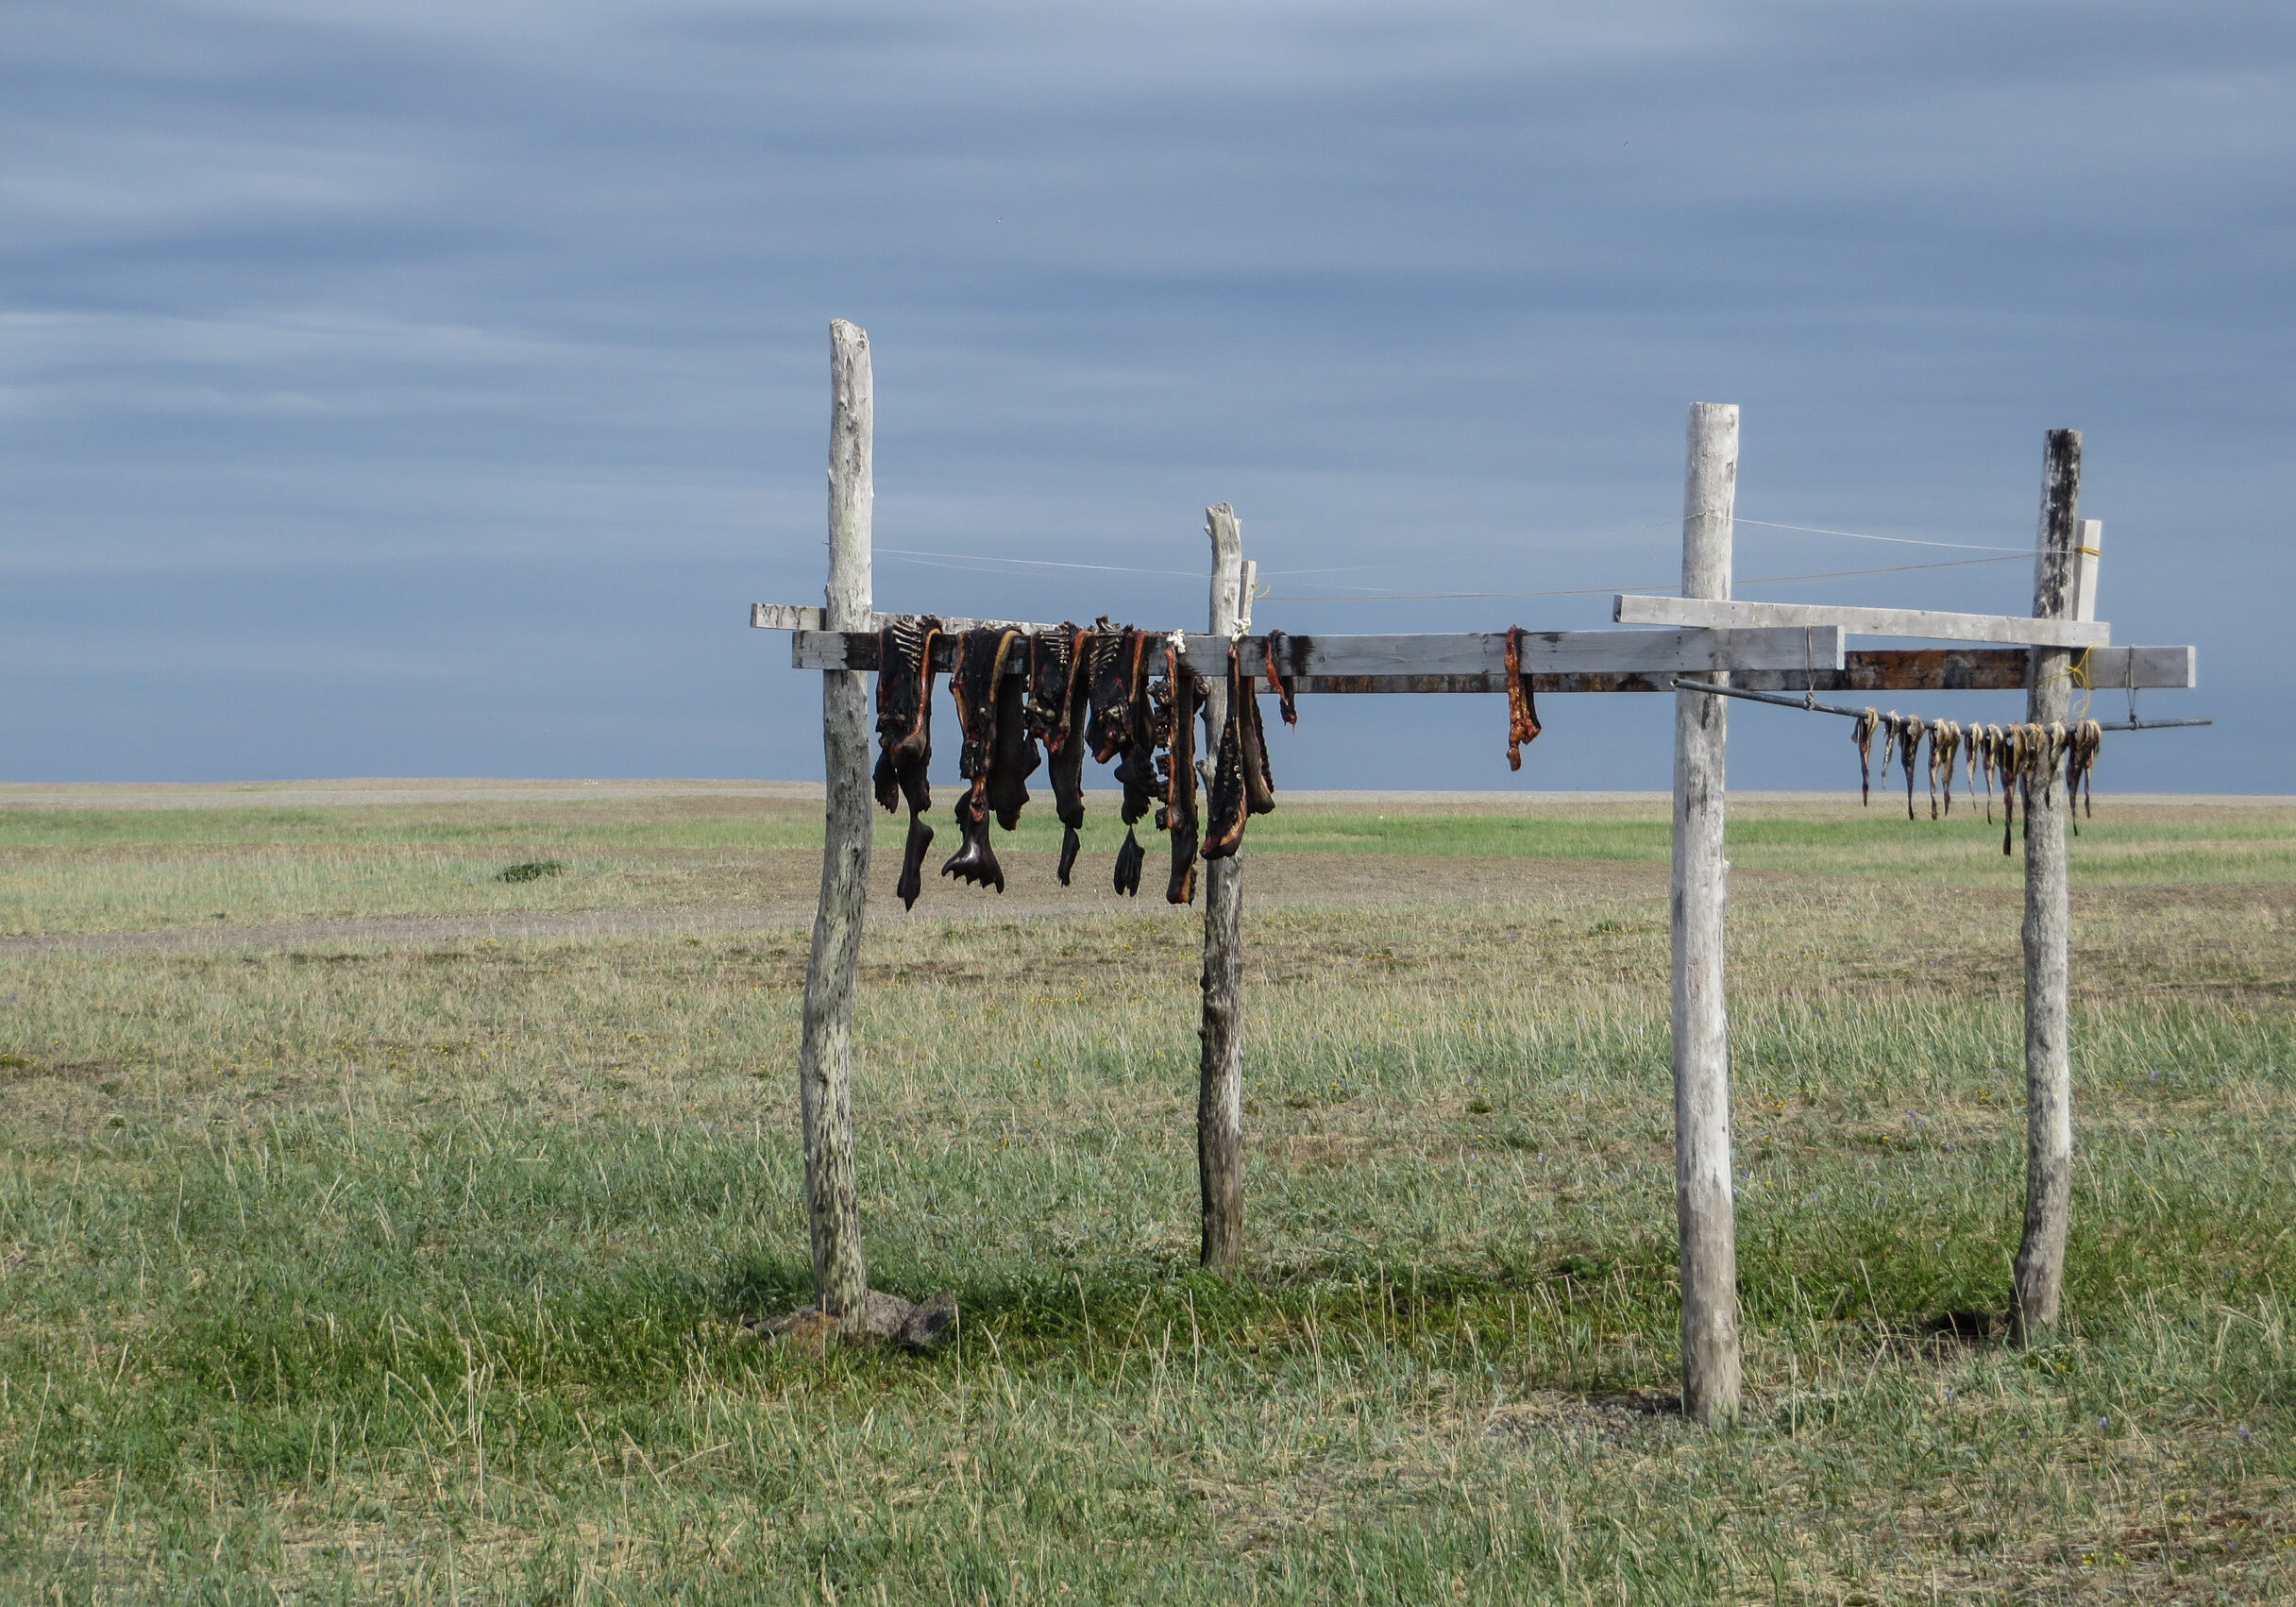 A drying rack in Gambell.